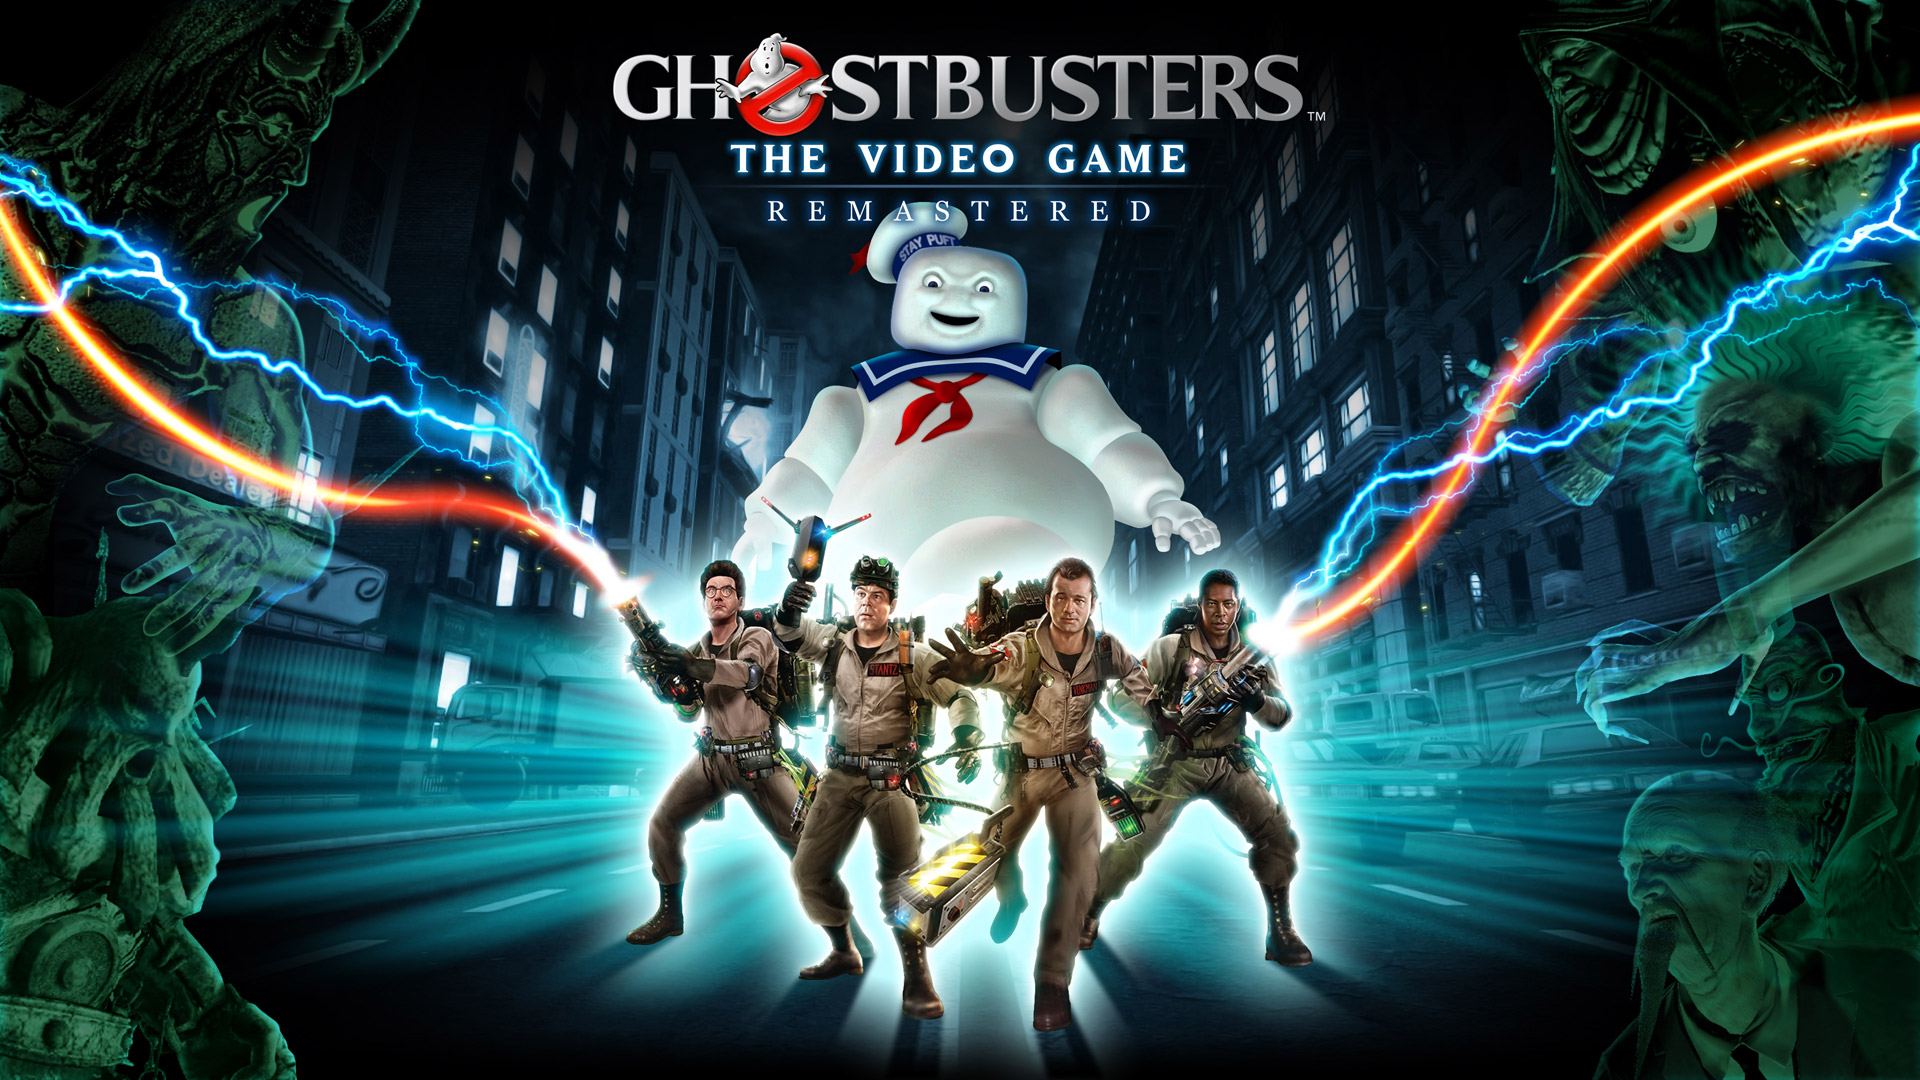 Ghostbusters Video Game Remastered , HD Wallpaper & Backgrounds